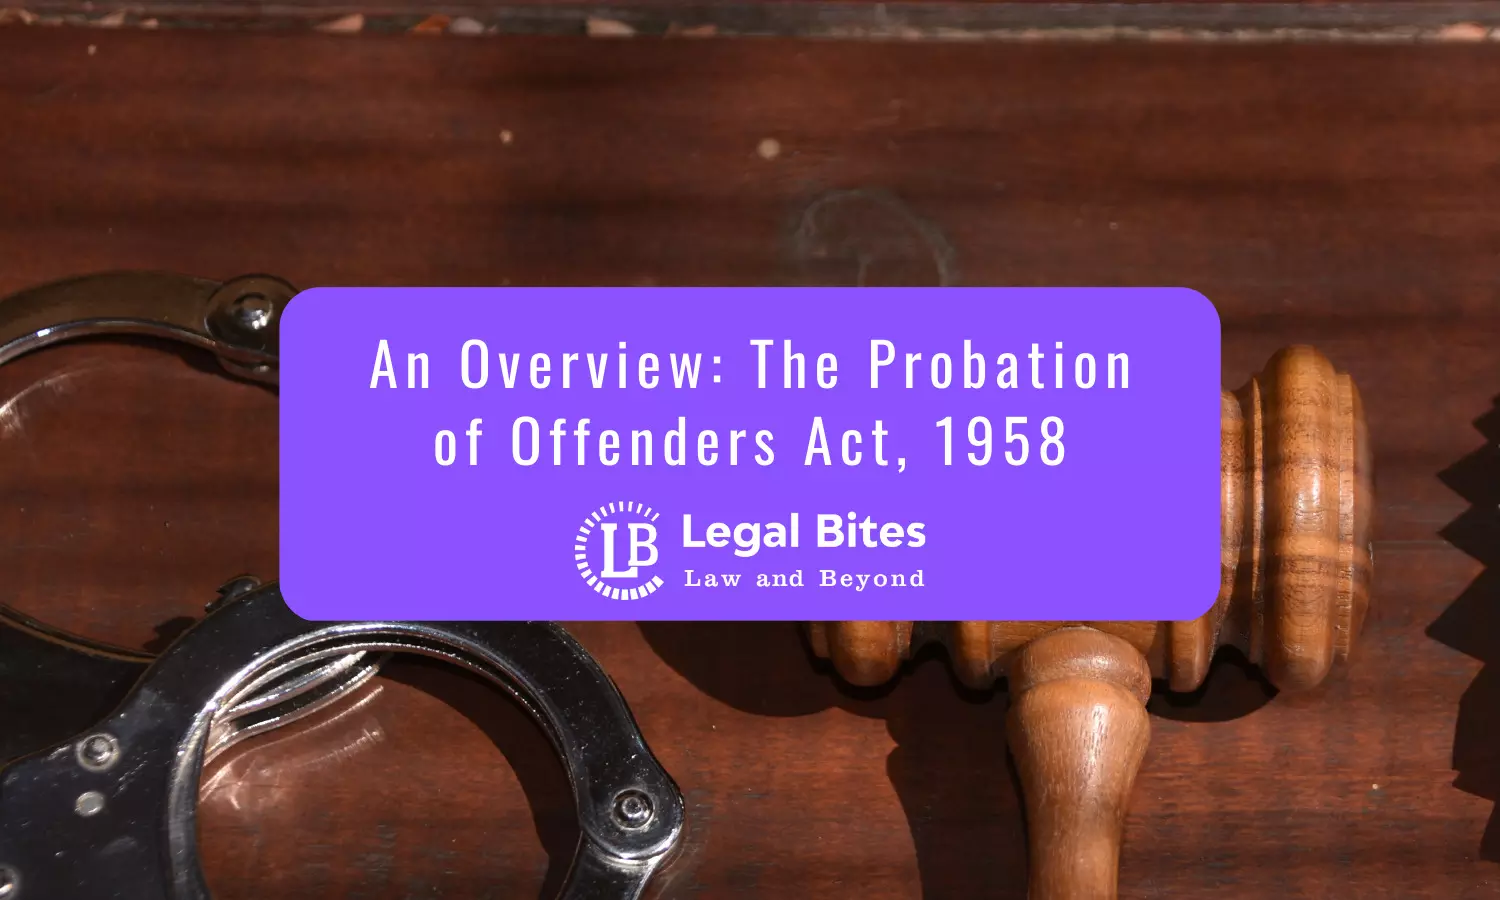 The Probation of Offenders Act, 1958: An Overview